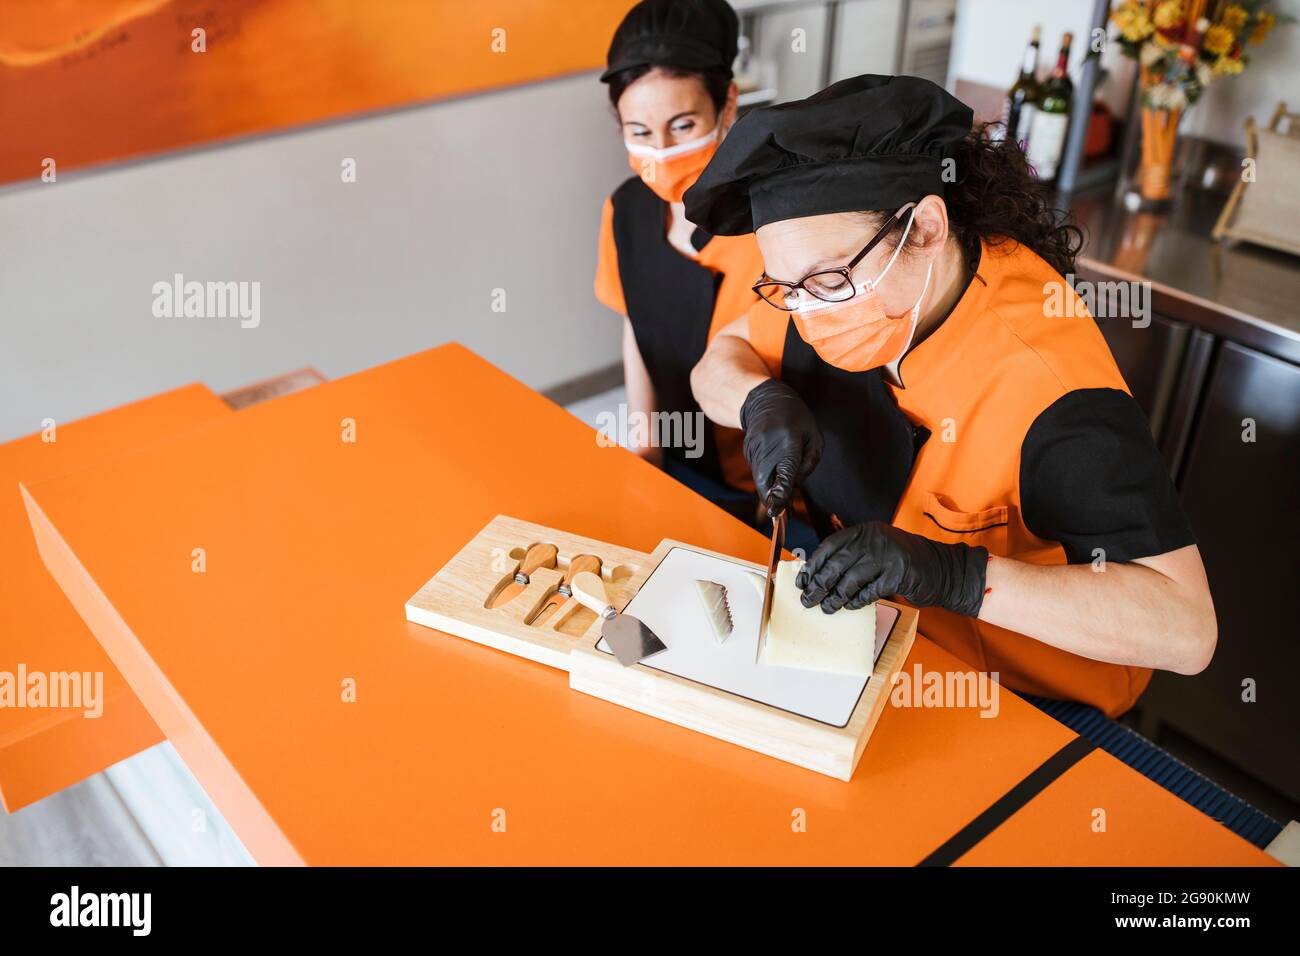 Waitress looking at female chef cutting cheese on board during COVID-19 Stock Photo